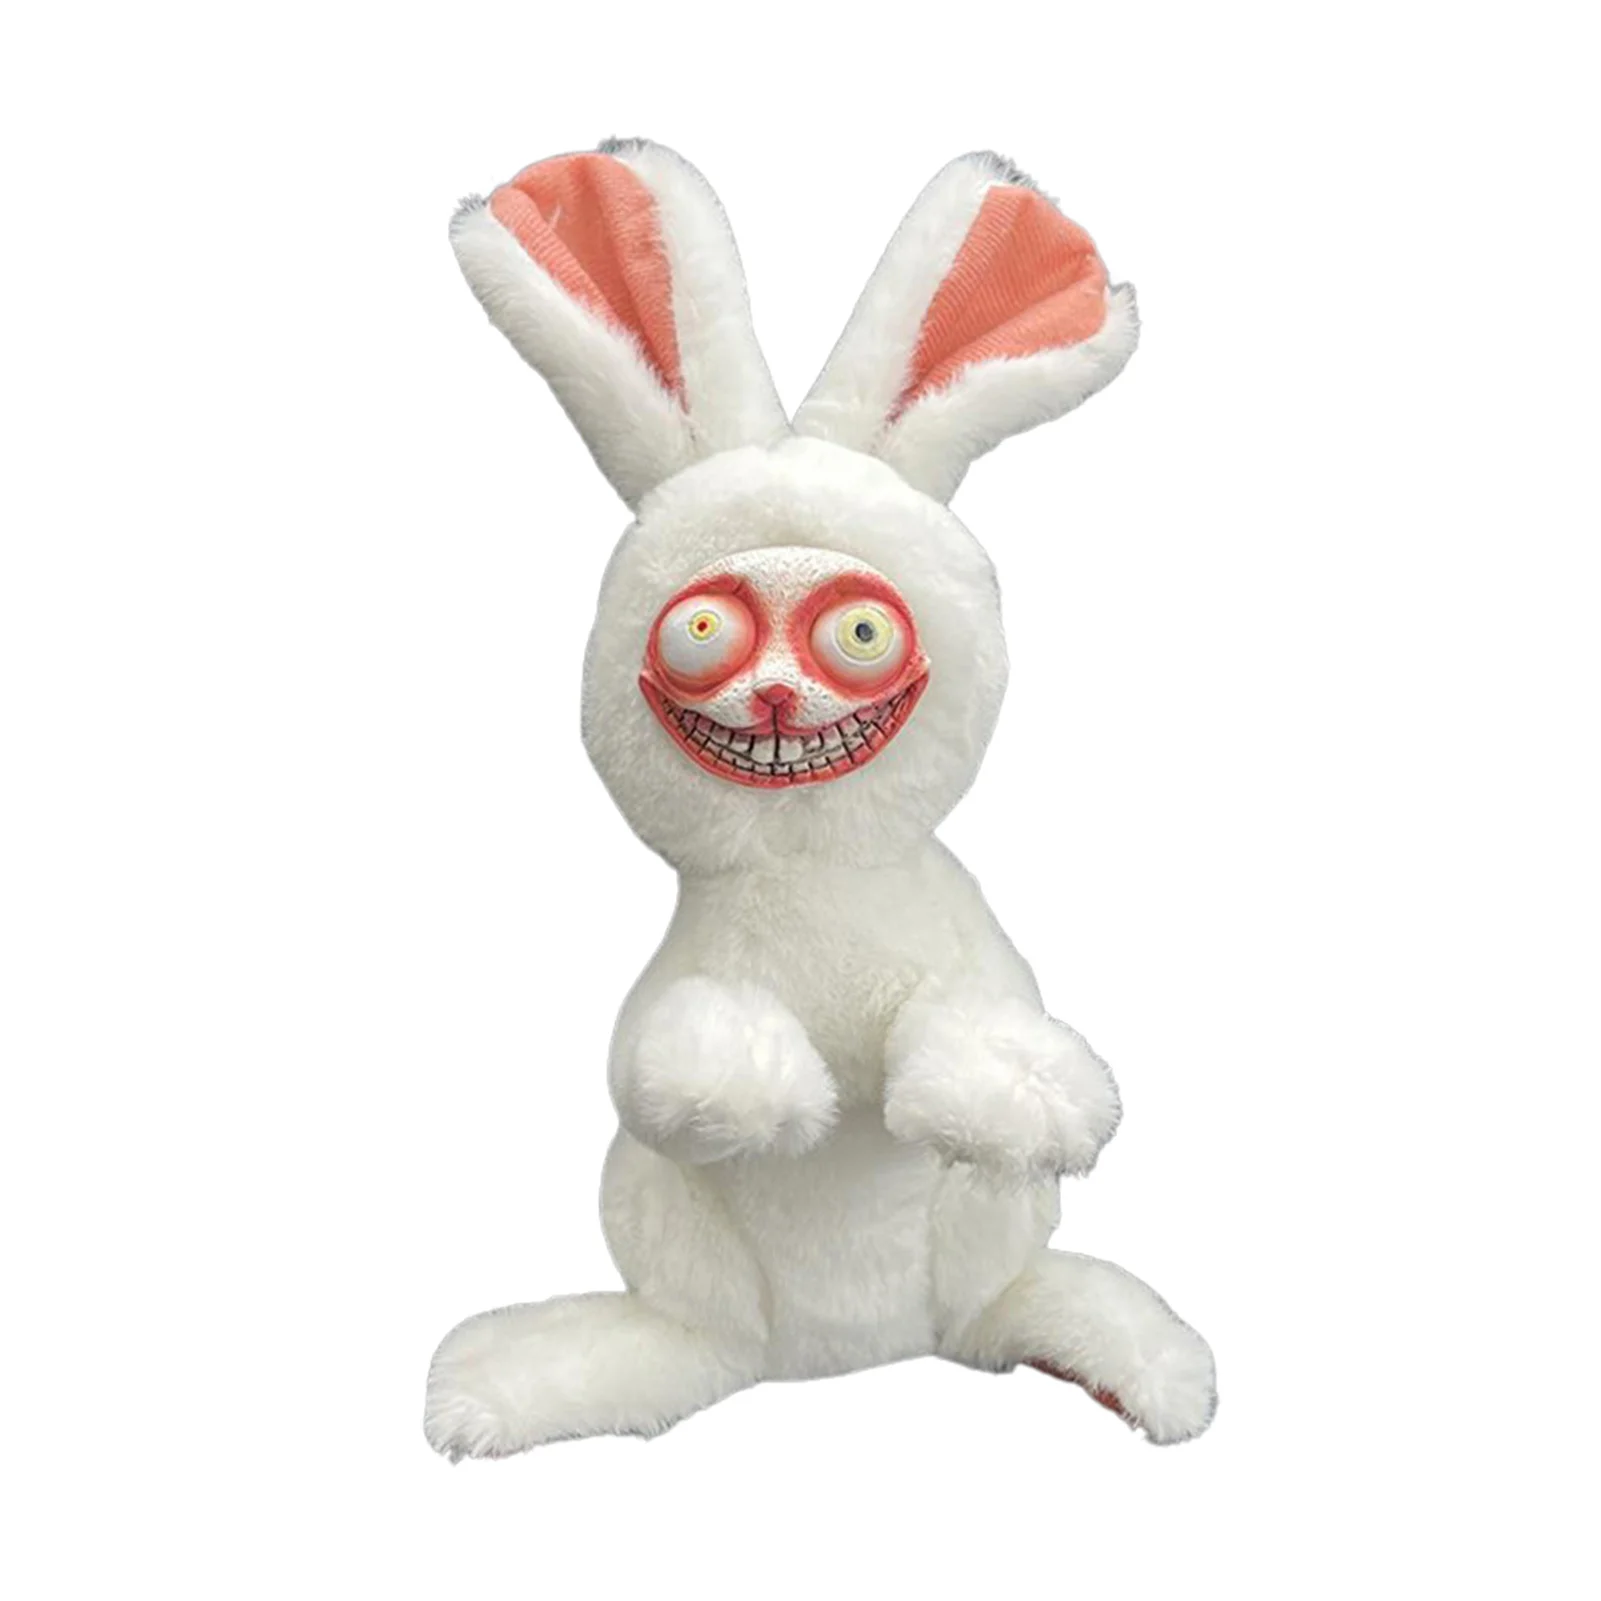 

15cm Scary Bunny Doll Crazy Bunny Plush Toy Horror Game Stuffed Rabbit Toys Birthday Gifts For Children Kids Simulation Rabbits